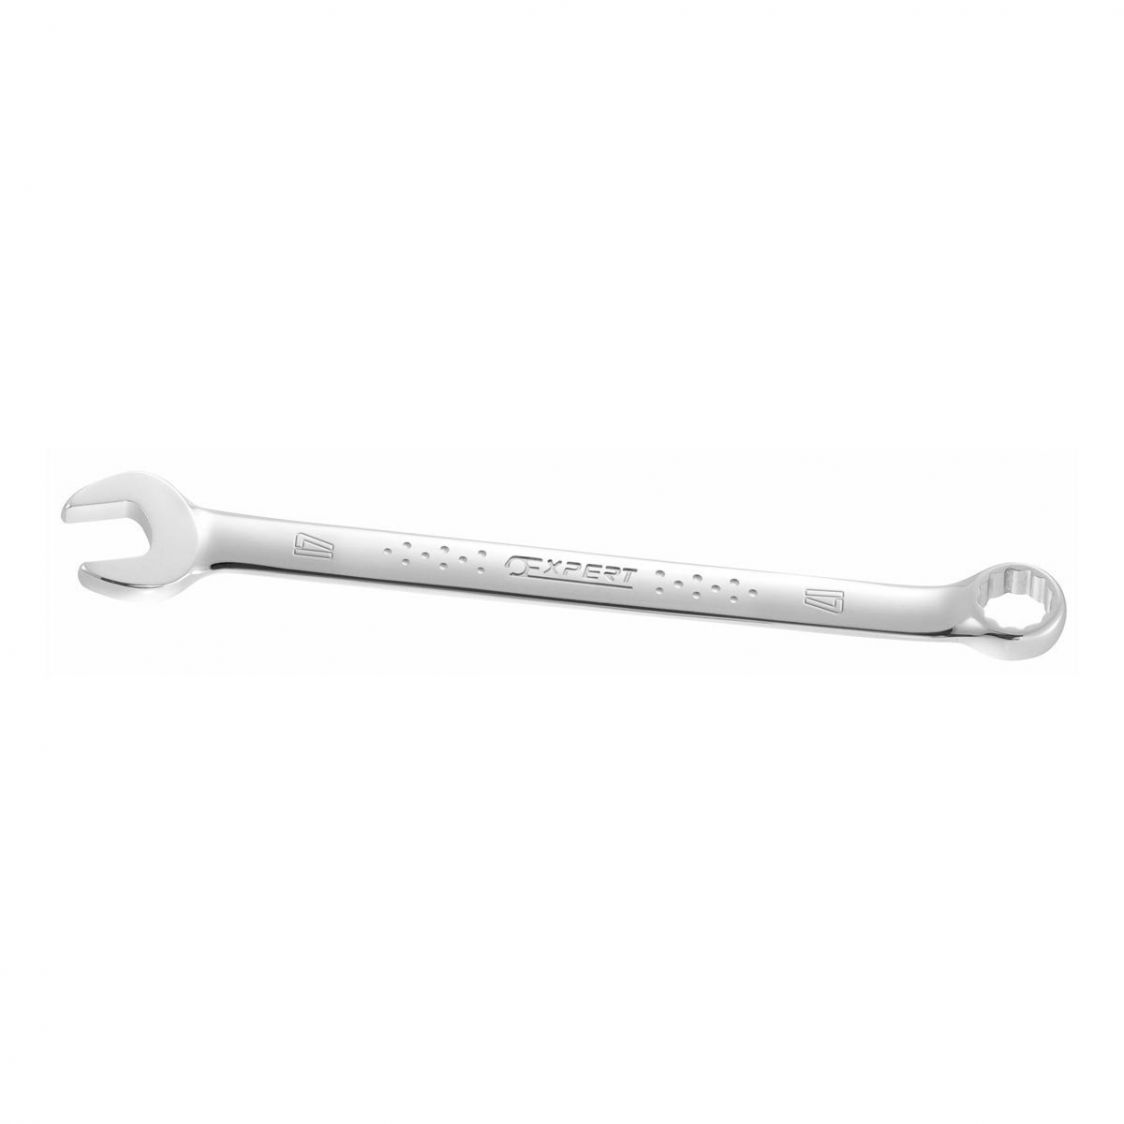 EXPERT by FACOM E117719 - 50mm Metric Long Combination Spanner